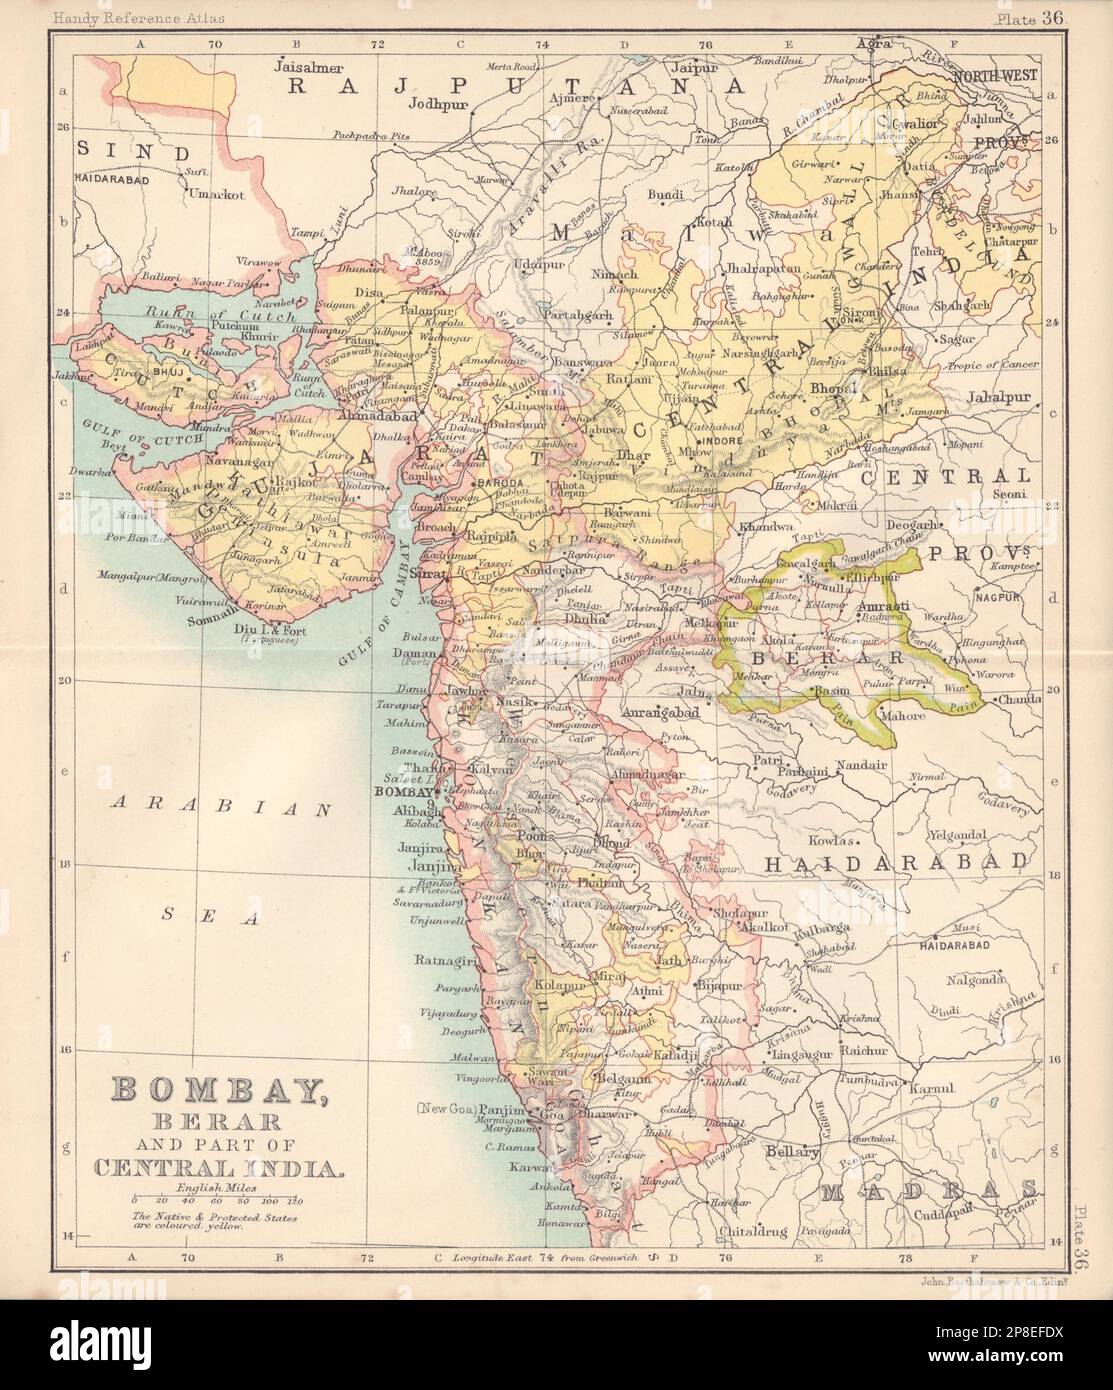 Bombay, Berar, and Part of Central India. NW British India 1898 old map Stock Photo